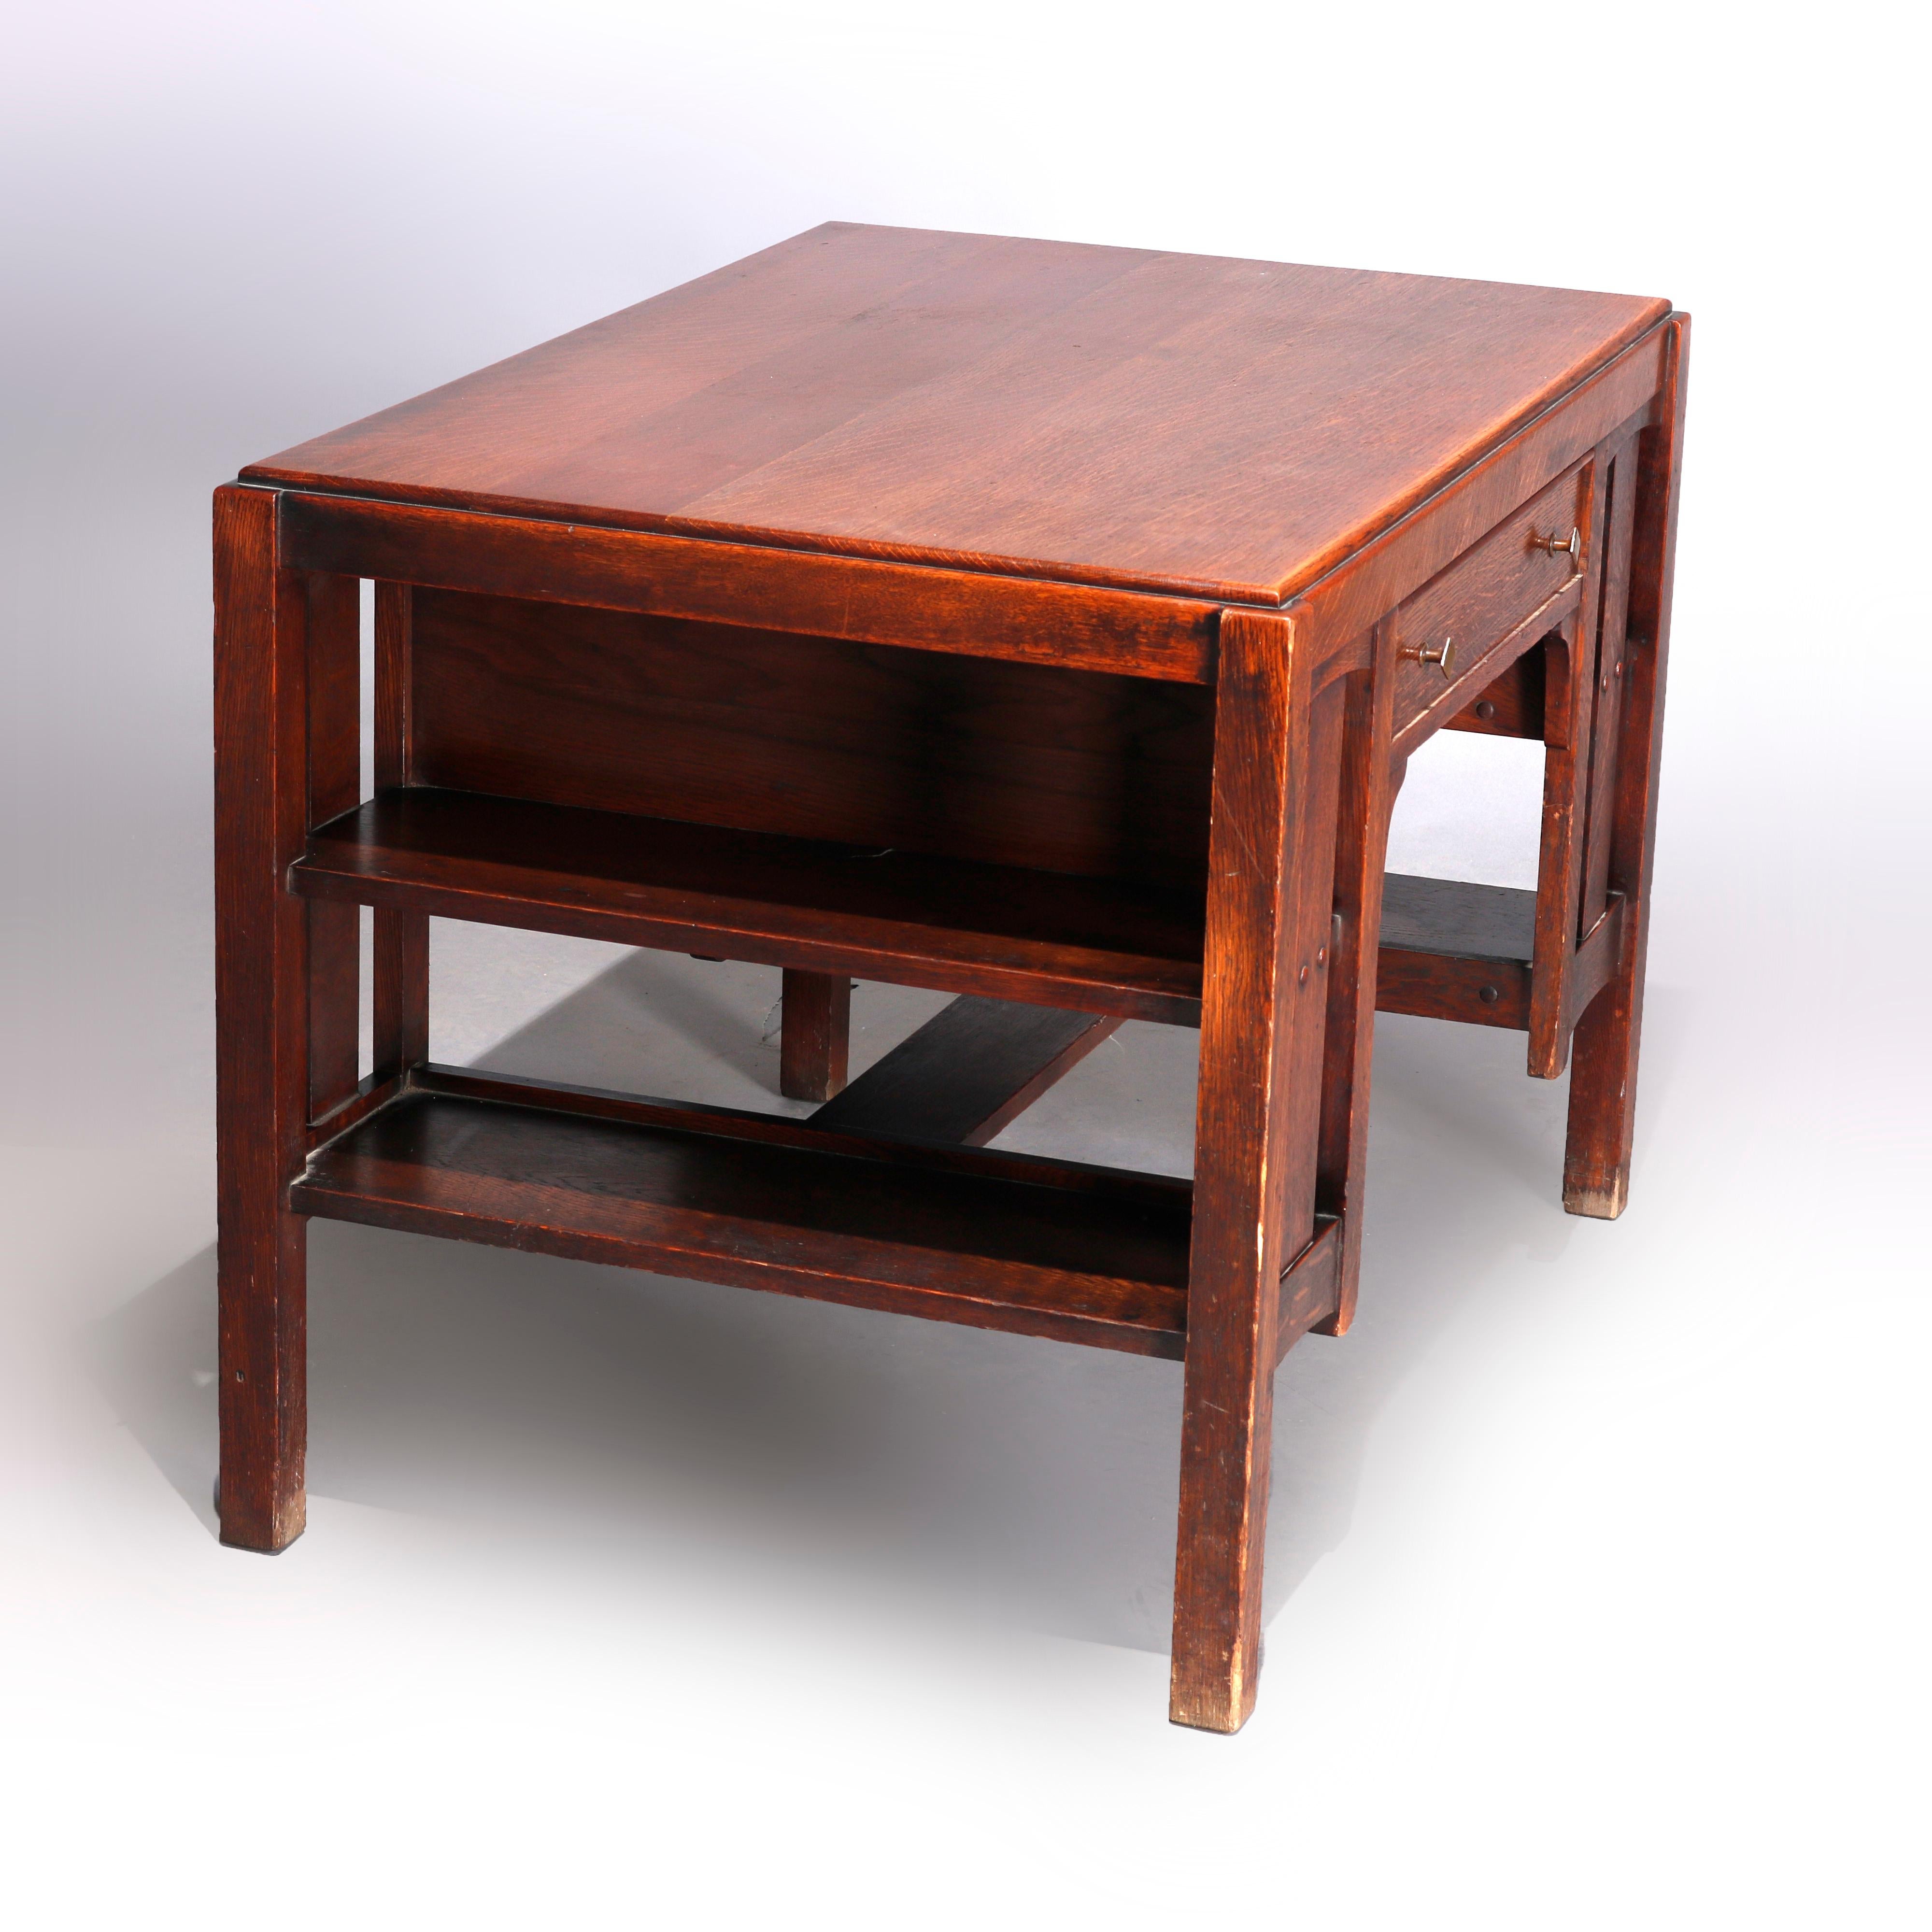 American Antique Arts & Crafts Mission Oak Desk, Library Table, by Limbert, circa 1910